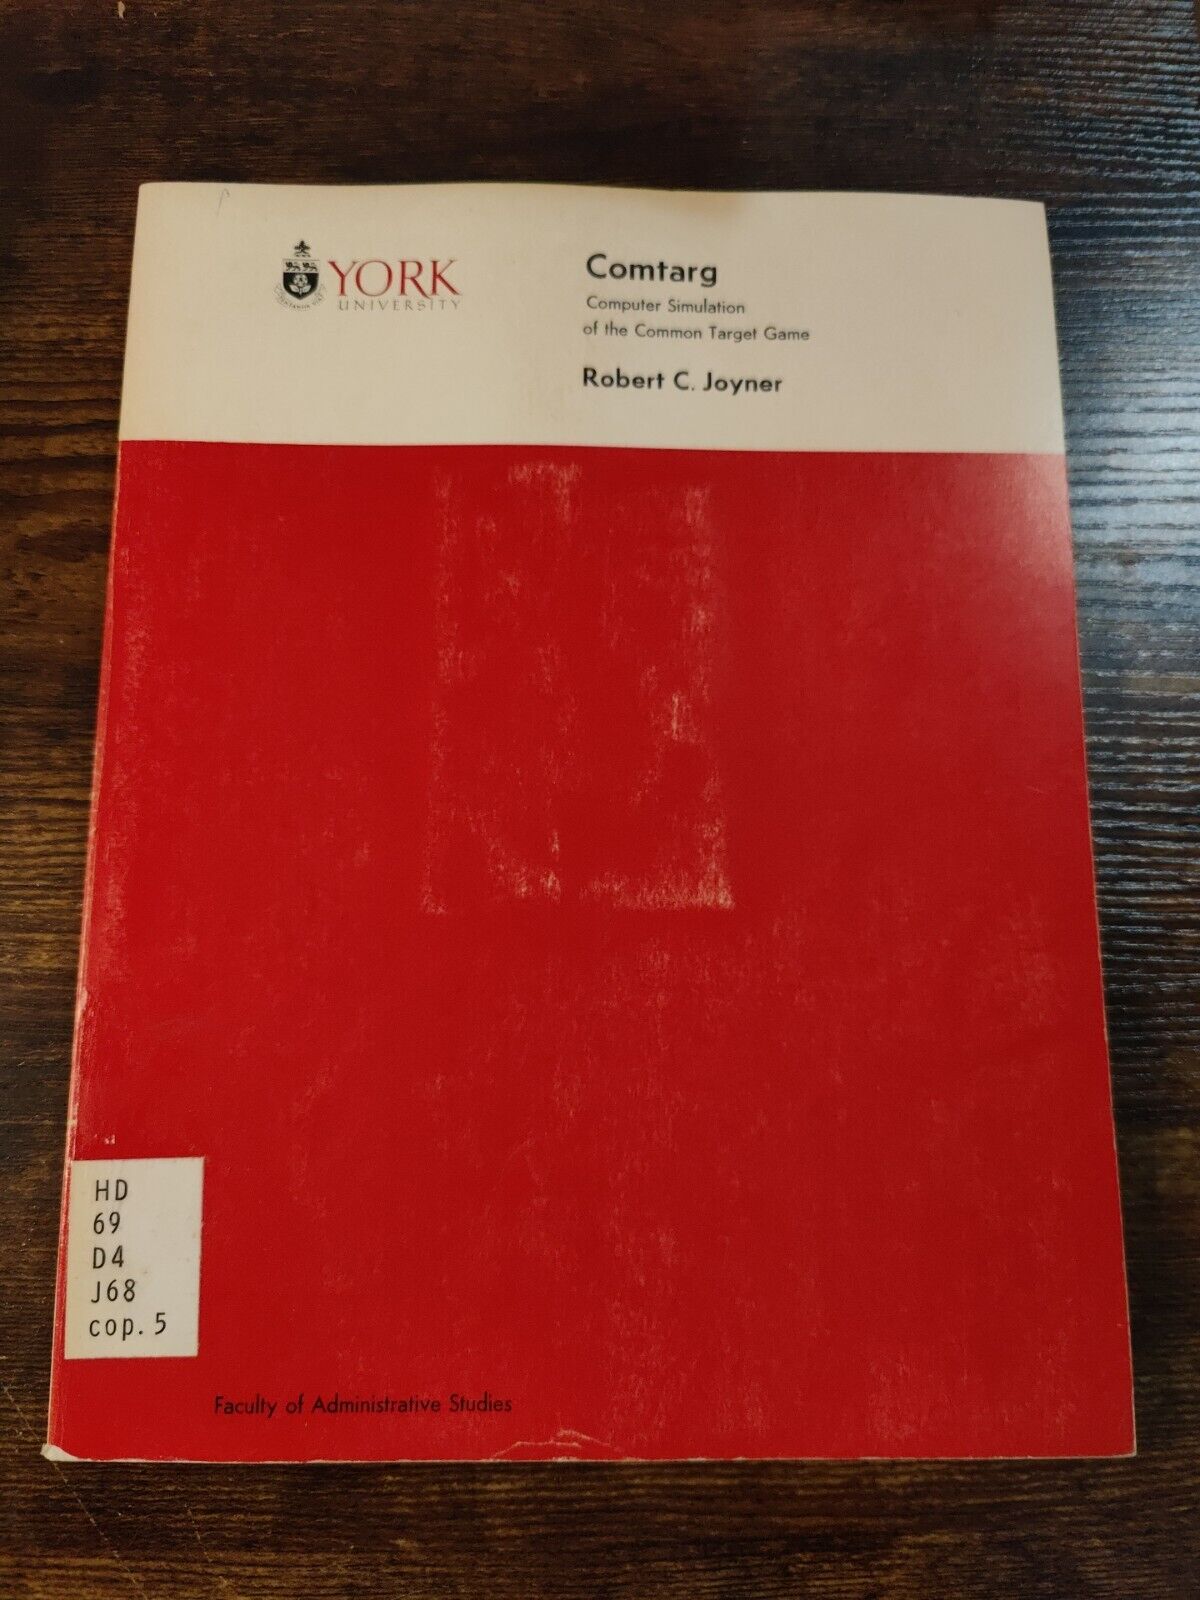 1969 Vintage Programming Book: Comtarg: Computer Simulation Of The Common Target